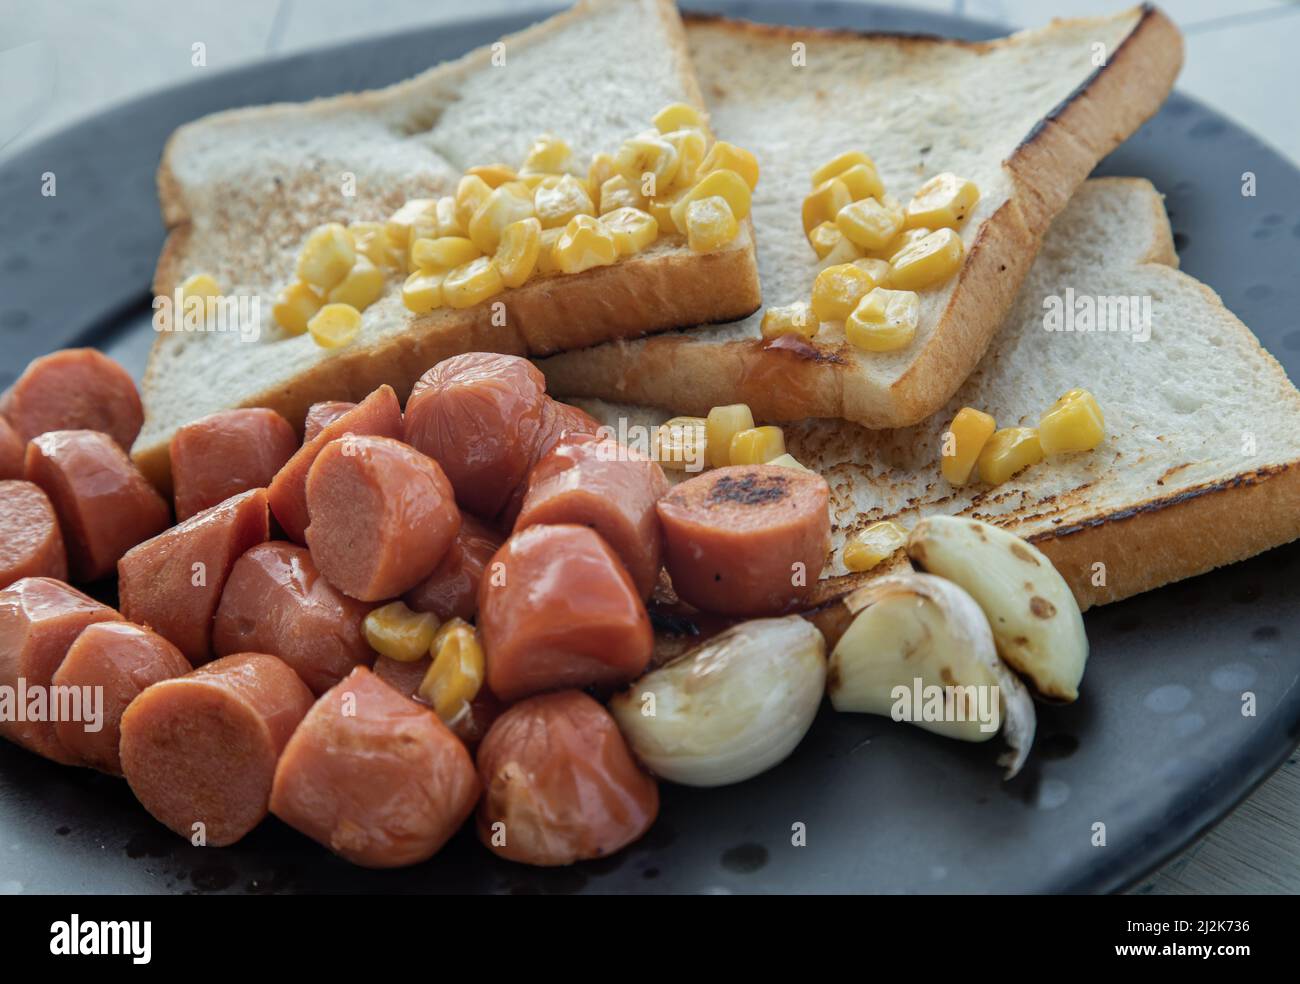 Close-up of breakfast with Fried sausages, Breads, Sweet corn kernels and Garlic. Selective focuse. Stock Photo